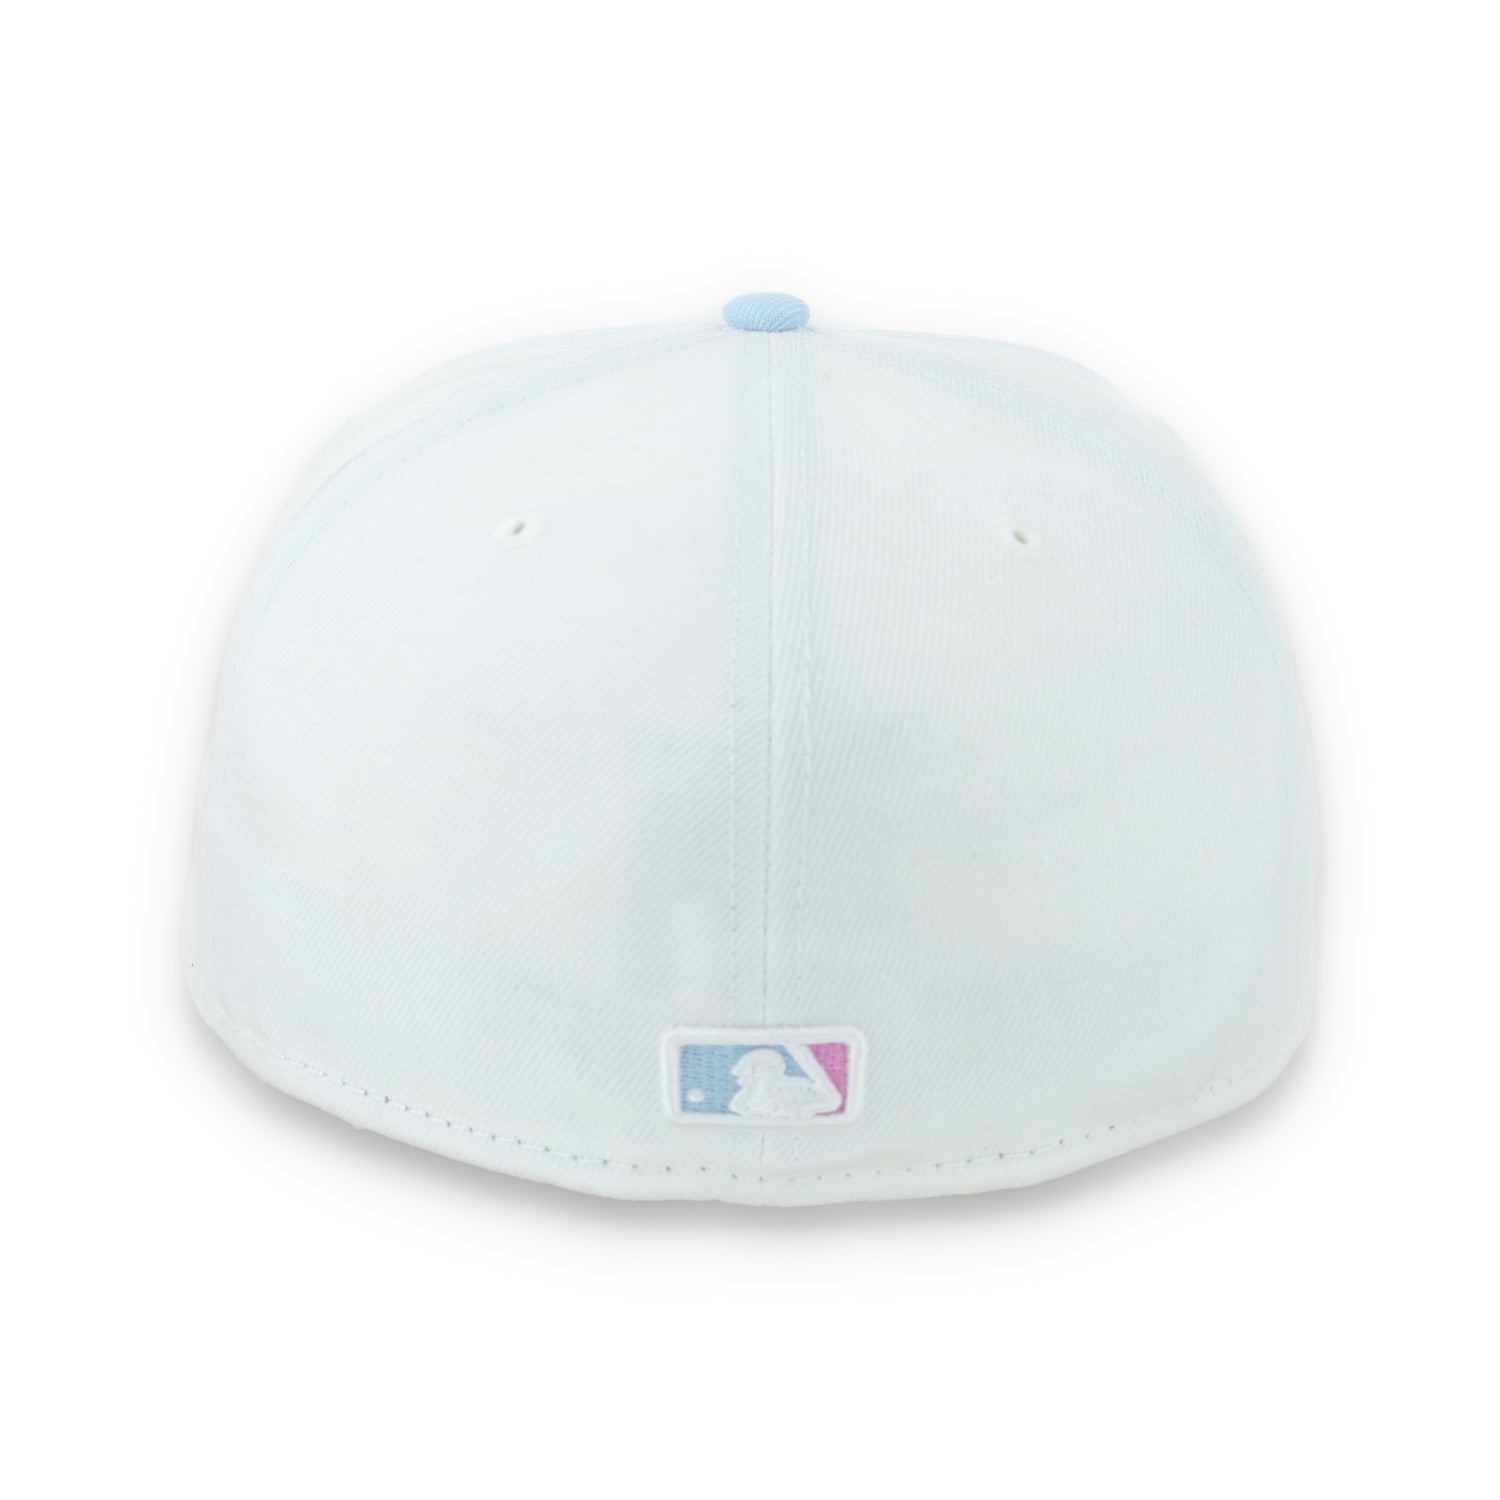 New Era Atlanta Braves Color Pack 59FIFTY Fitted Hat-White/Light Blue /Pink